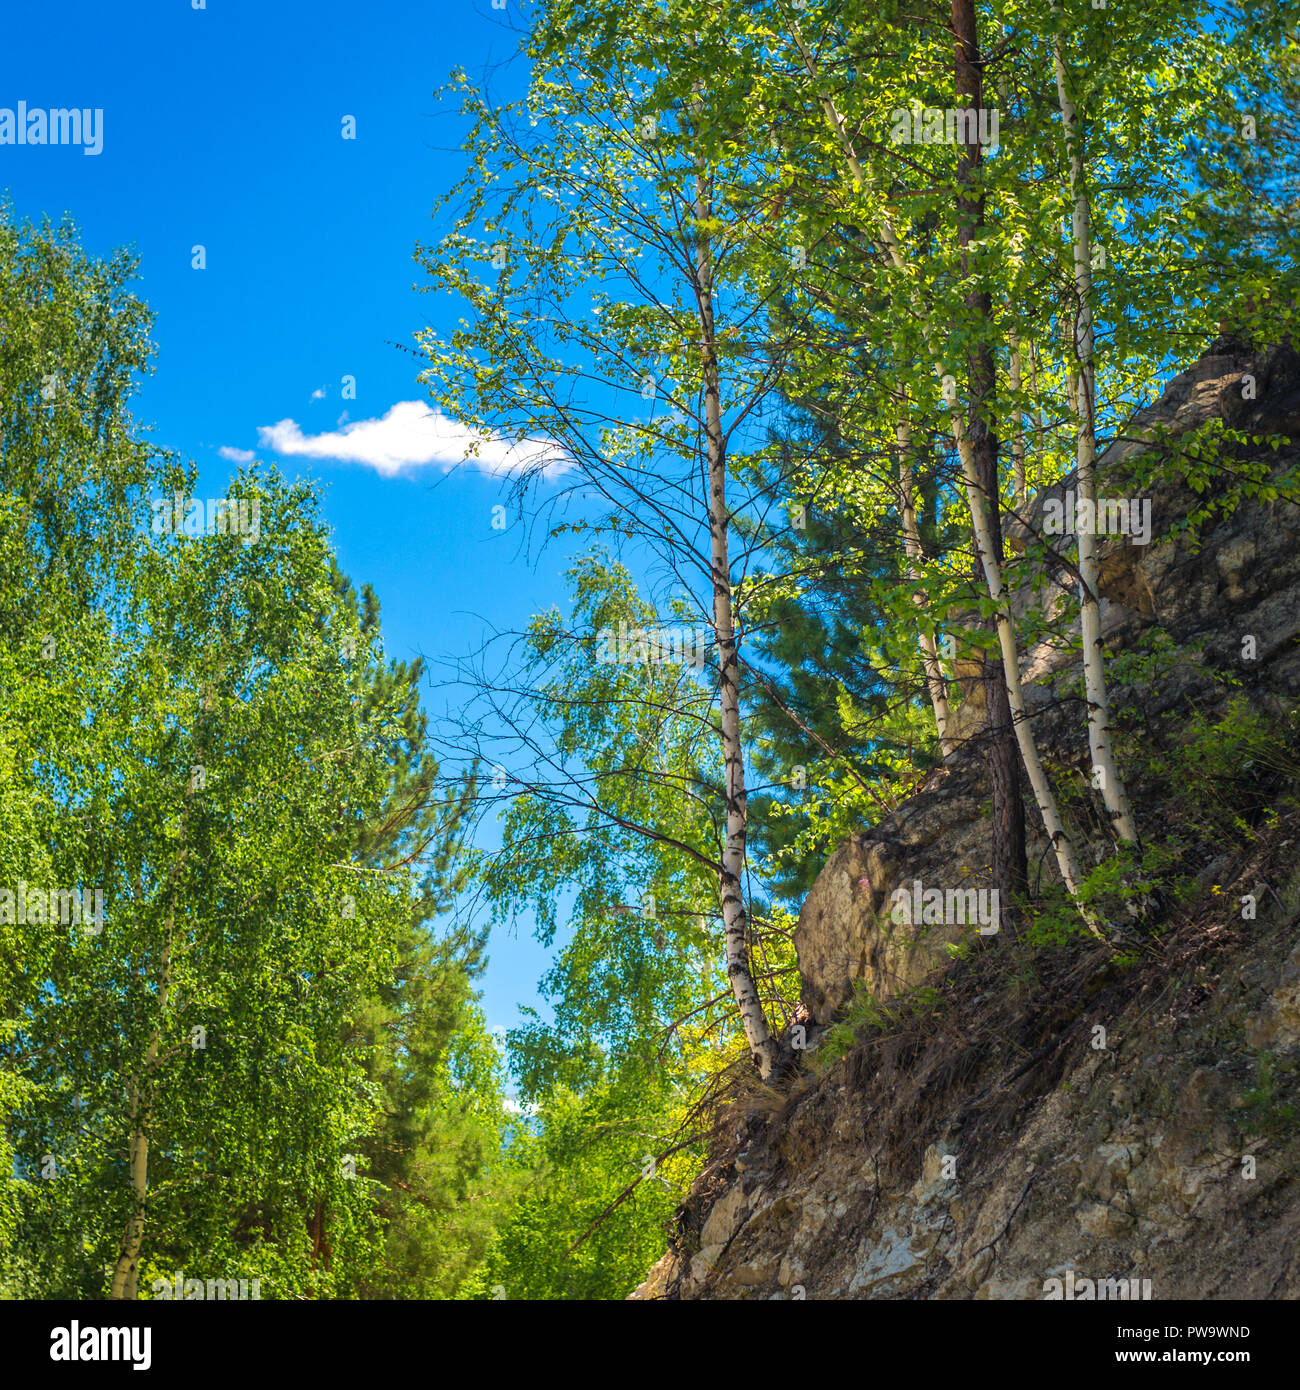 Birch Trees, Pines And Cedars Growing On A Rocky Steep Slope At Altai Mountains, Kazakhstan. Sunny Summer Day, Blue Sky And White Clouds In Background Stock Photo